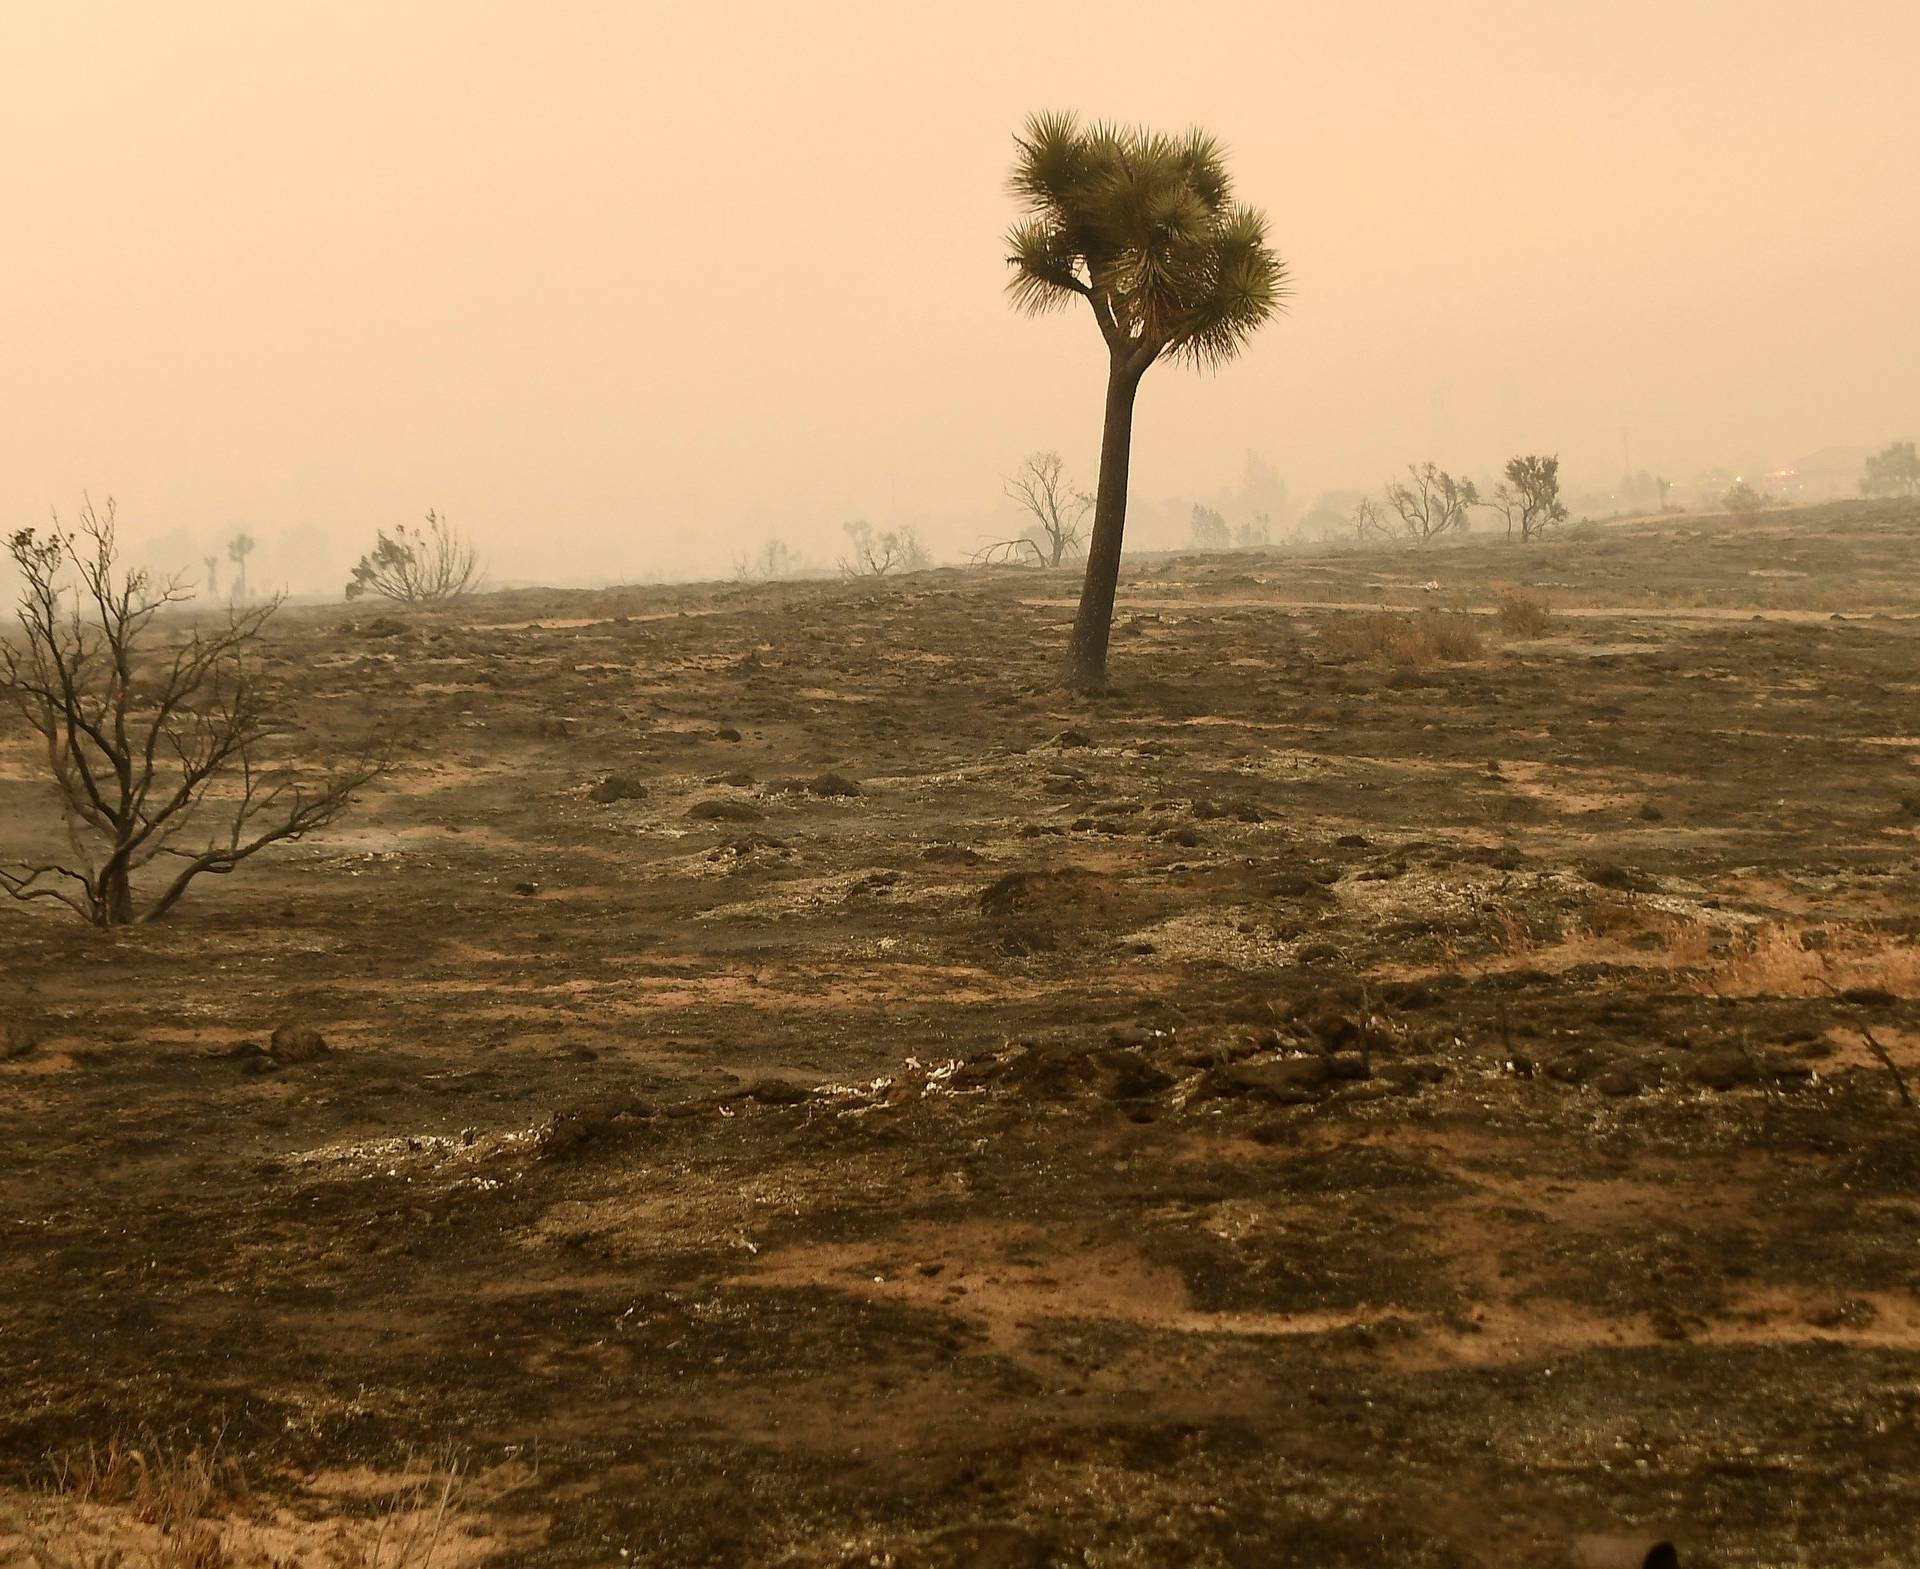 Charred landscape is shown after the so-called Bluecut Fire burned through in San Bernardino County, California